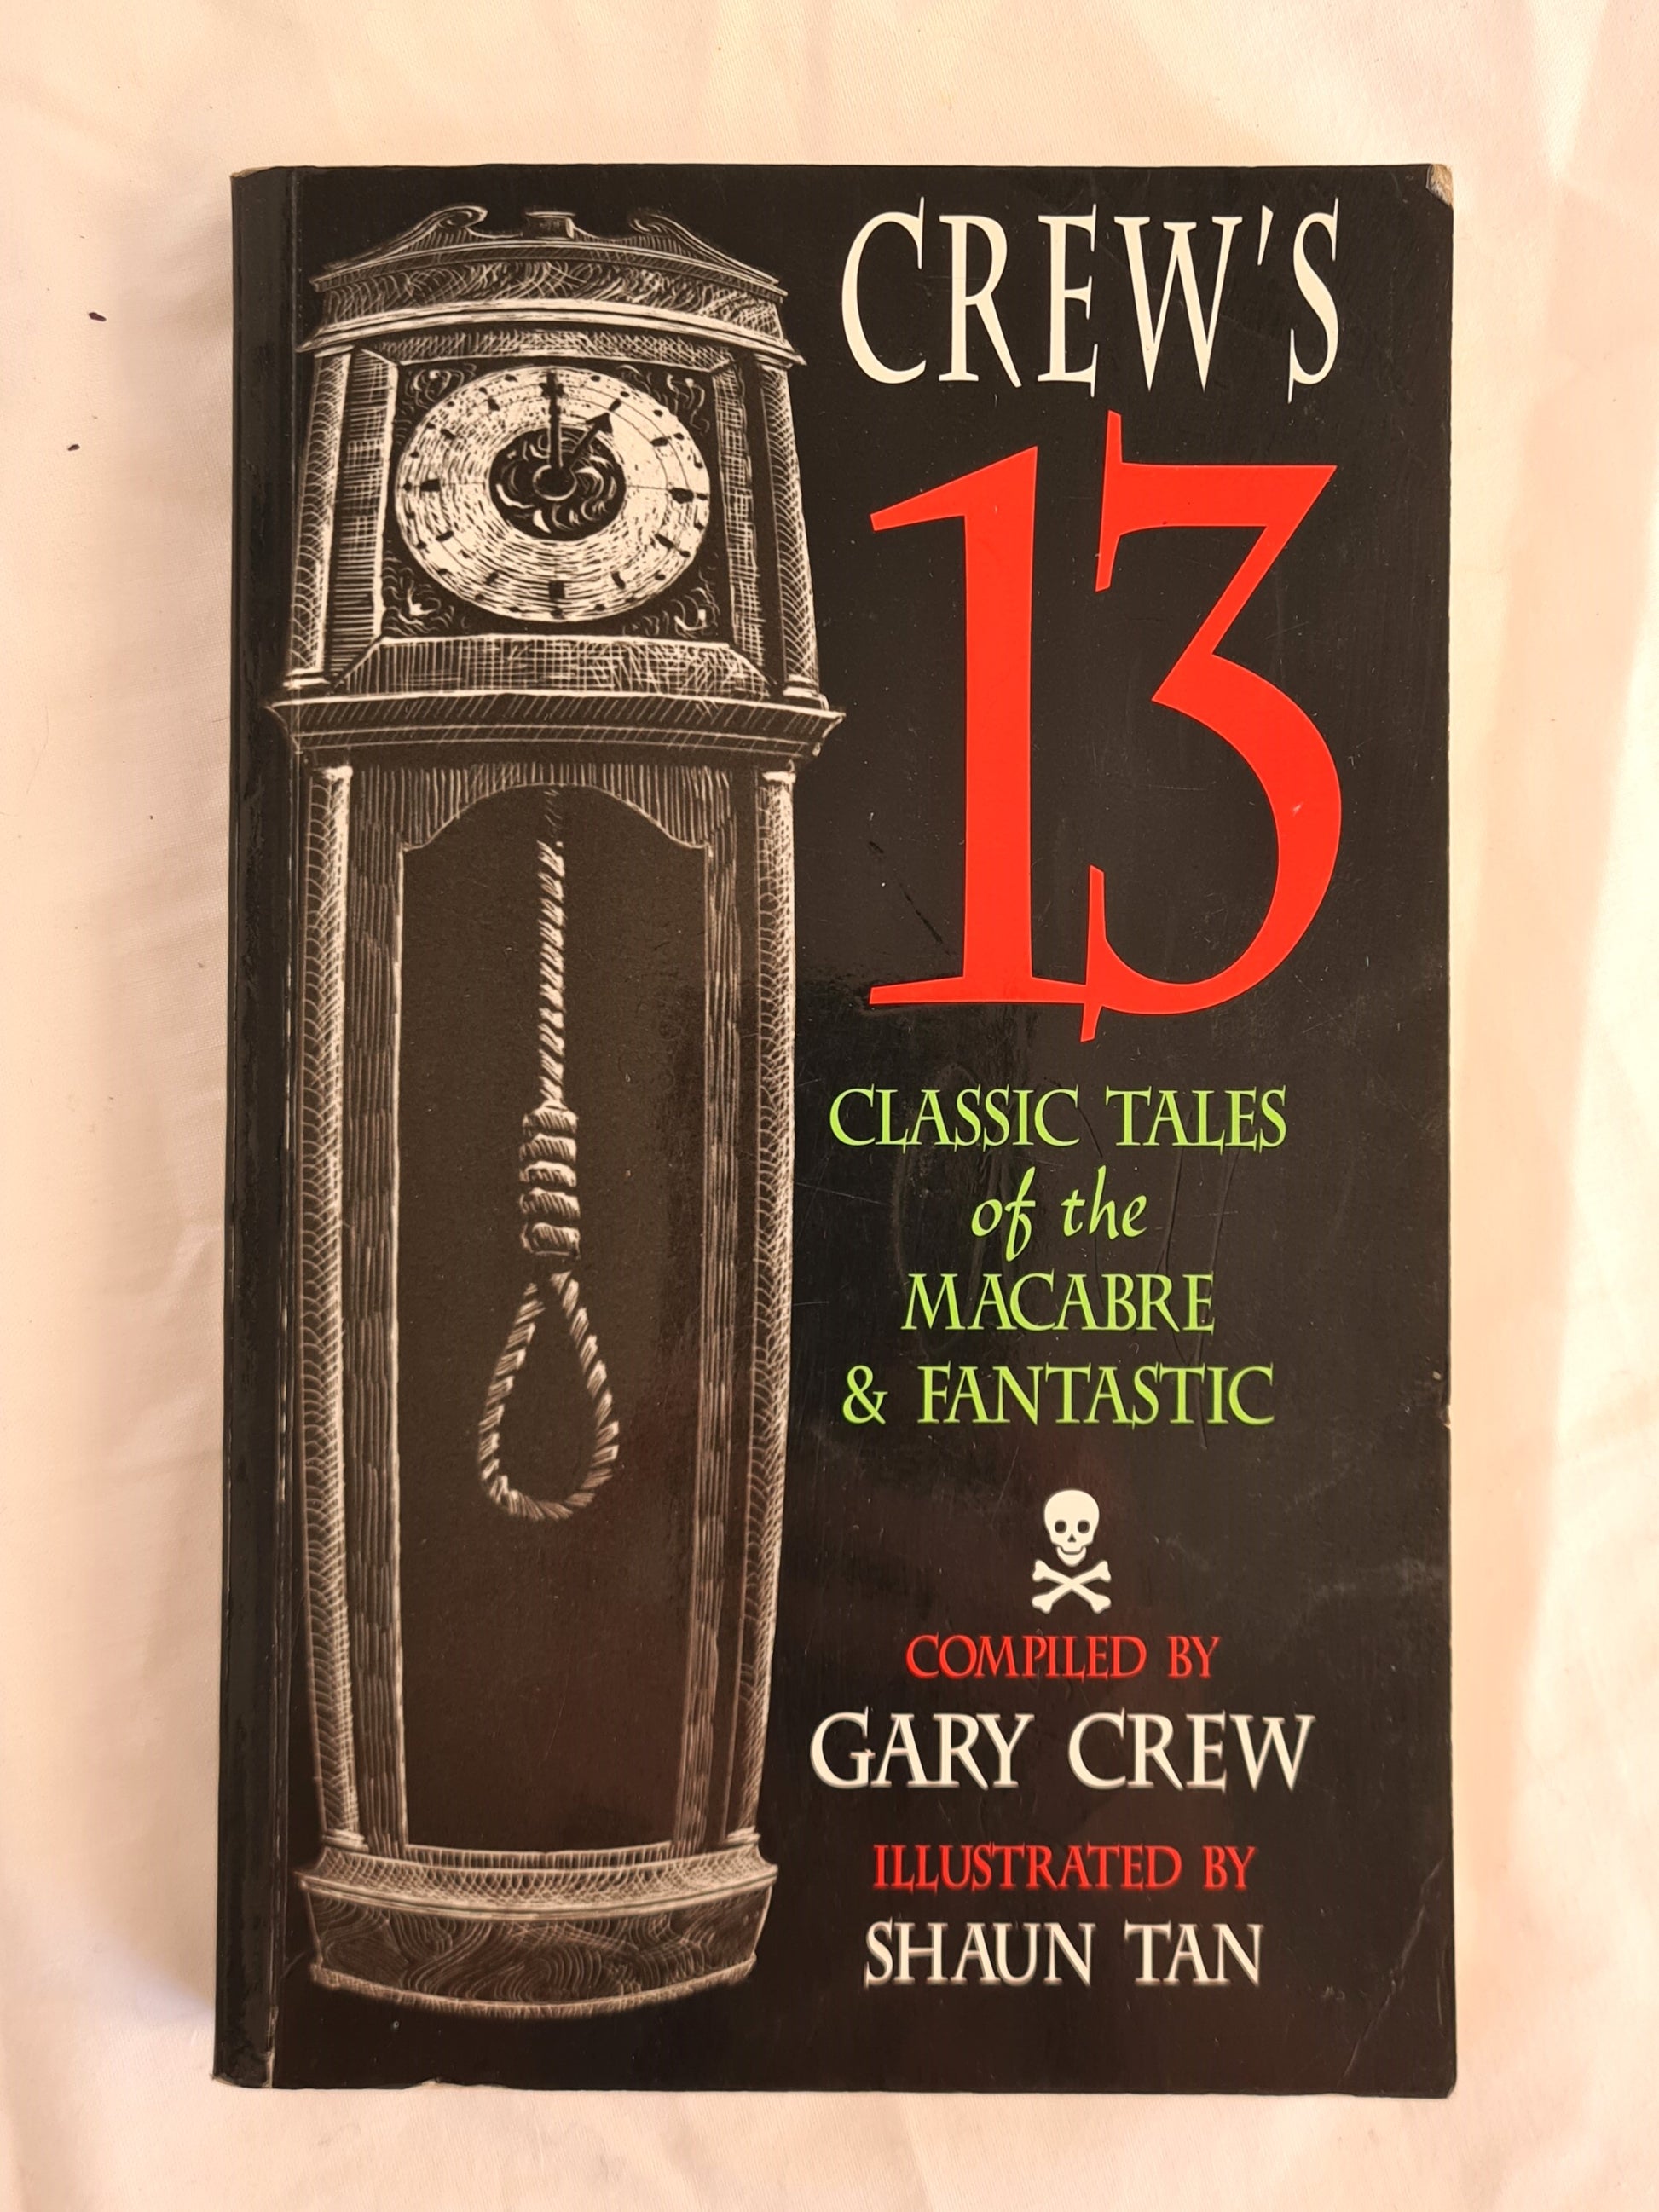 Crew’s 13  Classic Tales of the Macabre & Fantastic  Compiled by Gary Crew  Illustrated by Shaun Tan